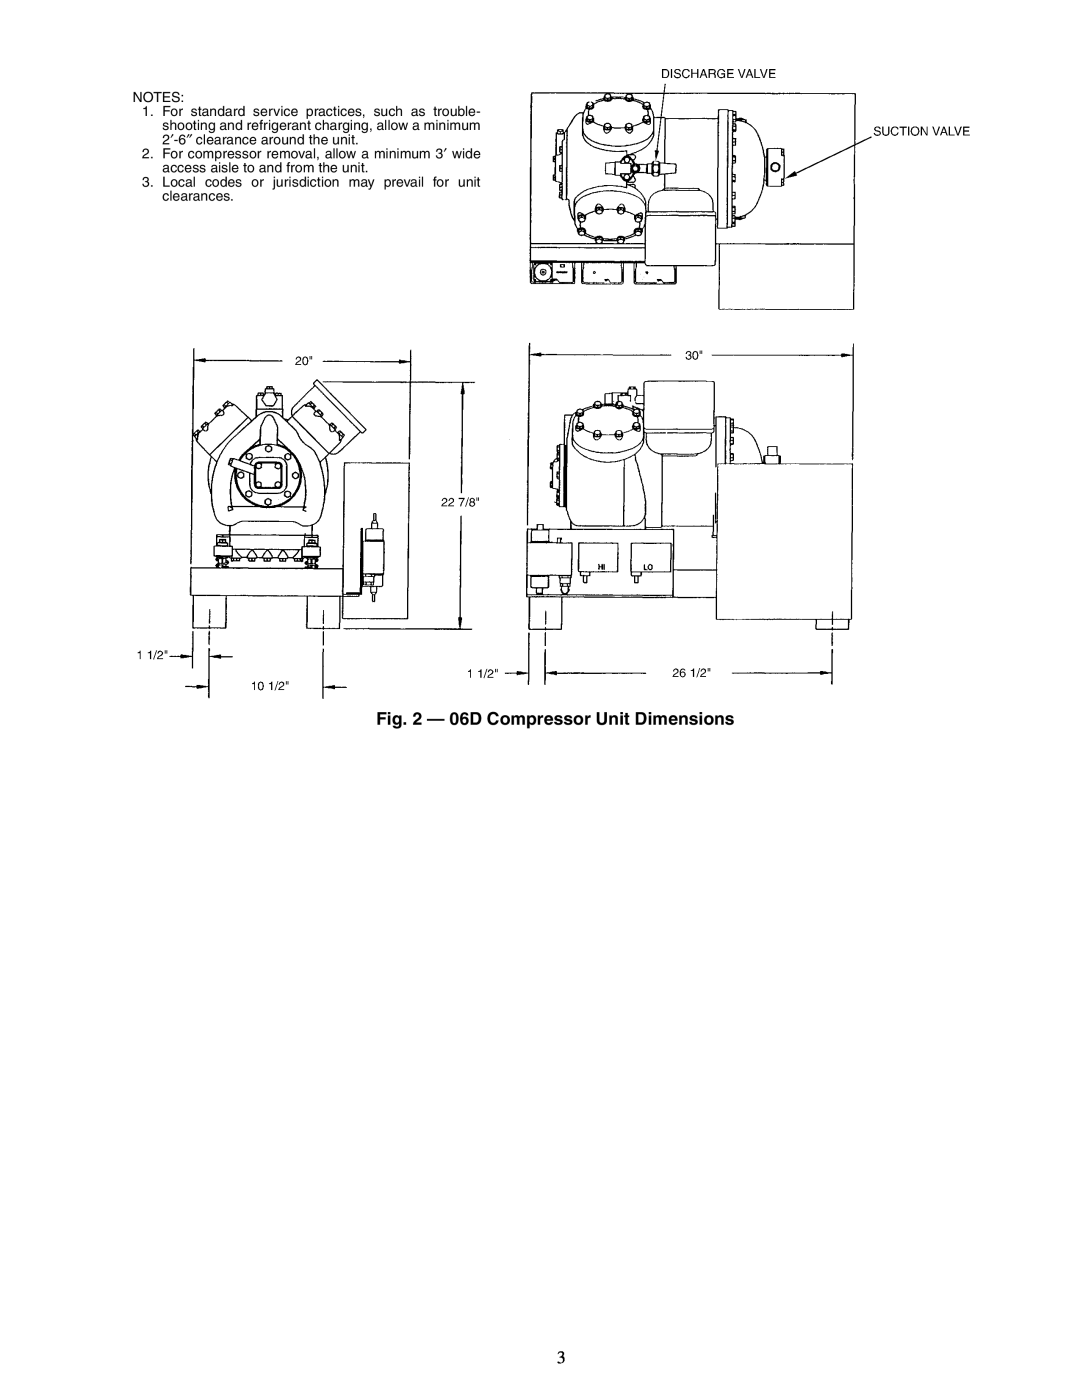 Carrier specifications 06D Compressor Unit Dimensions, For standard service practices, such as trouble 